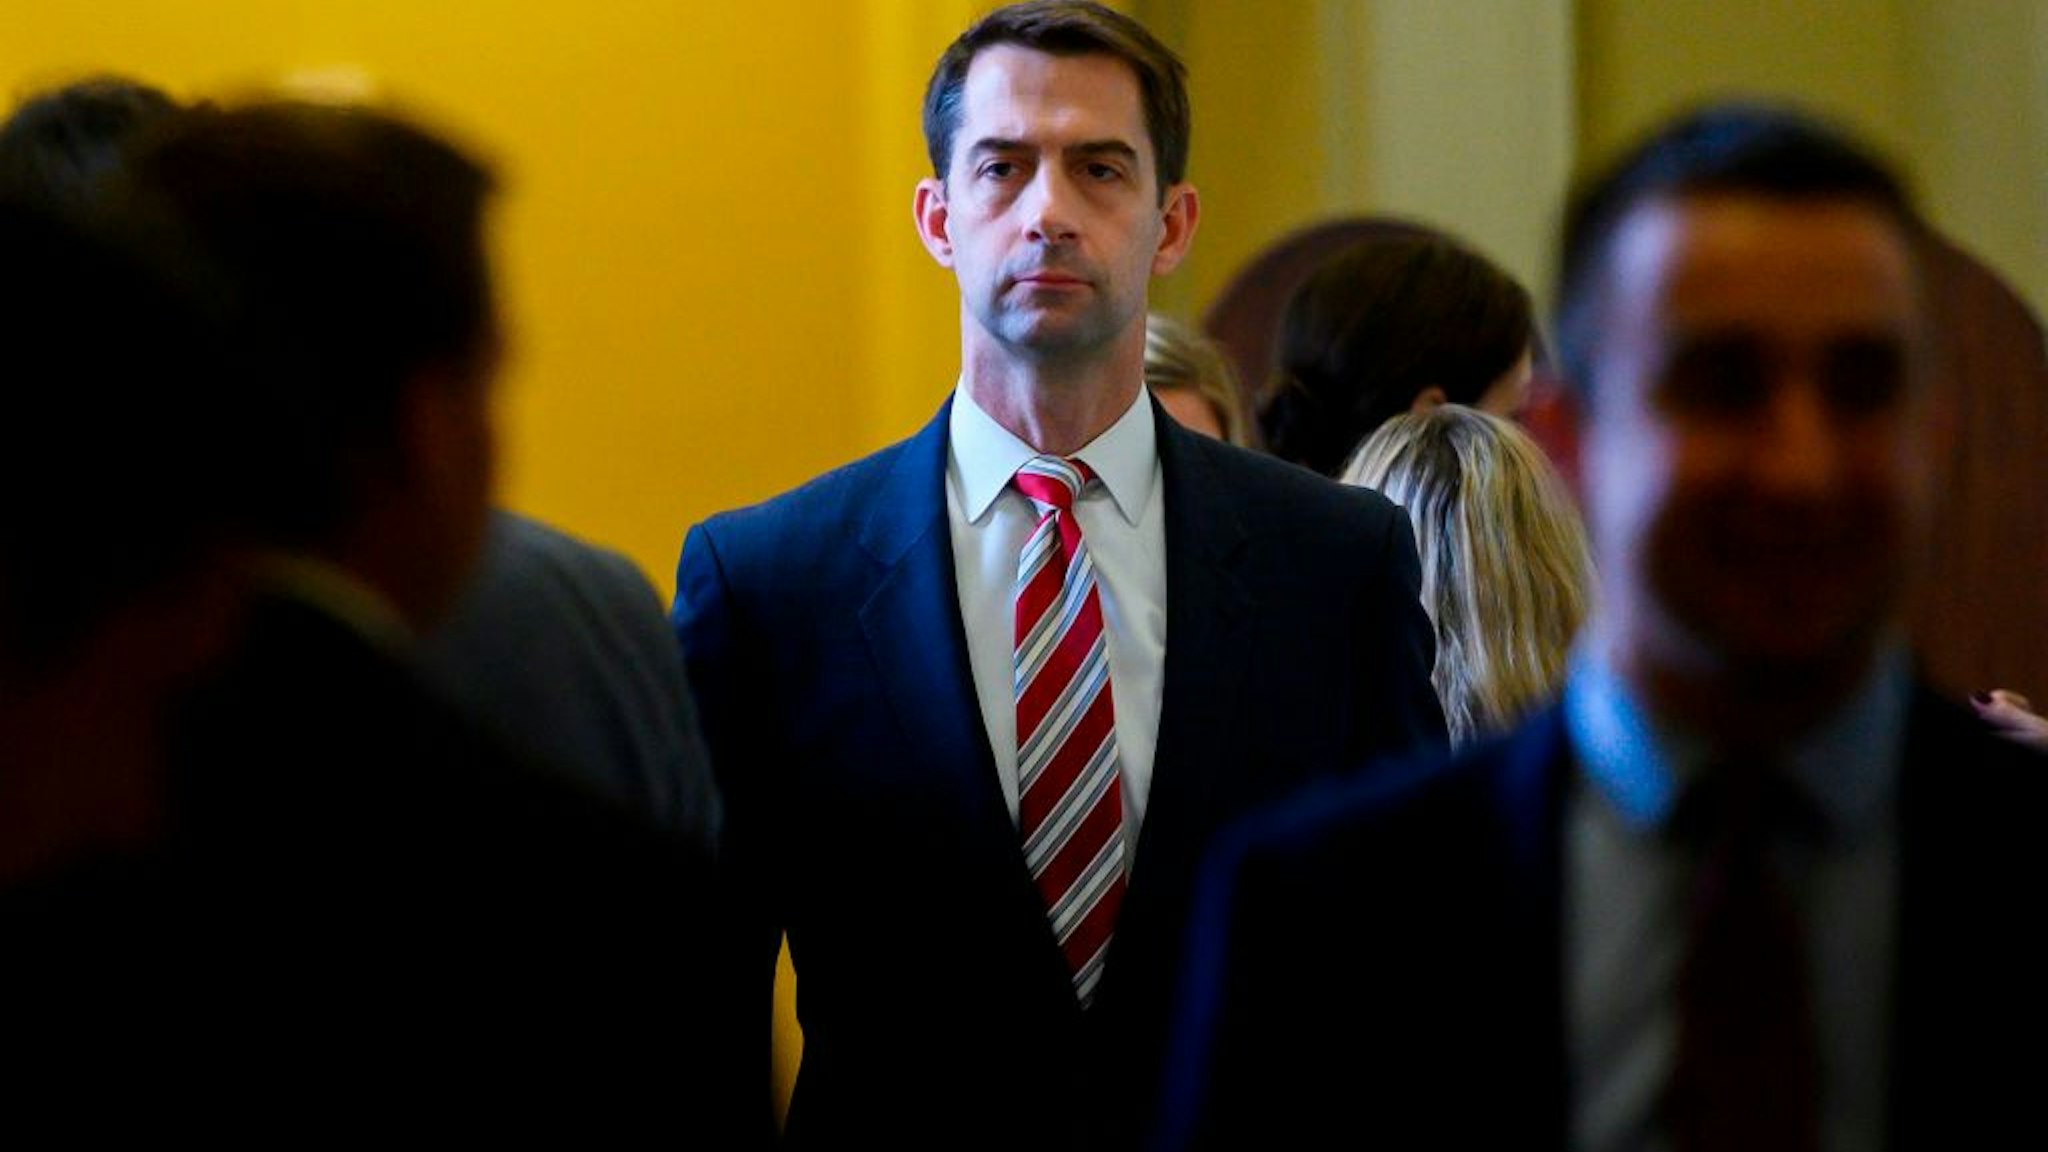 US Senator Tom Cotton (R-AR) walks out of a senate luncheon on Capitol Hill in Washington, DC on October 22, 2019. (Photo by Andrew CABALLERO-REYNOLDS / AFP) (Photo by ANDREW CABALLERO-REYNOLDS/AFP via Getty Images)